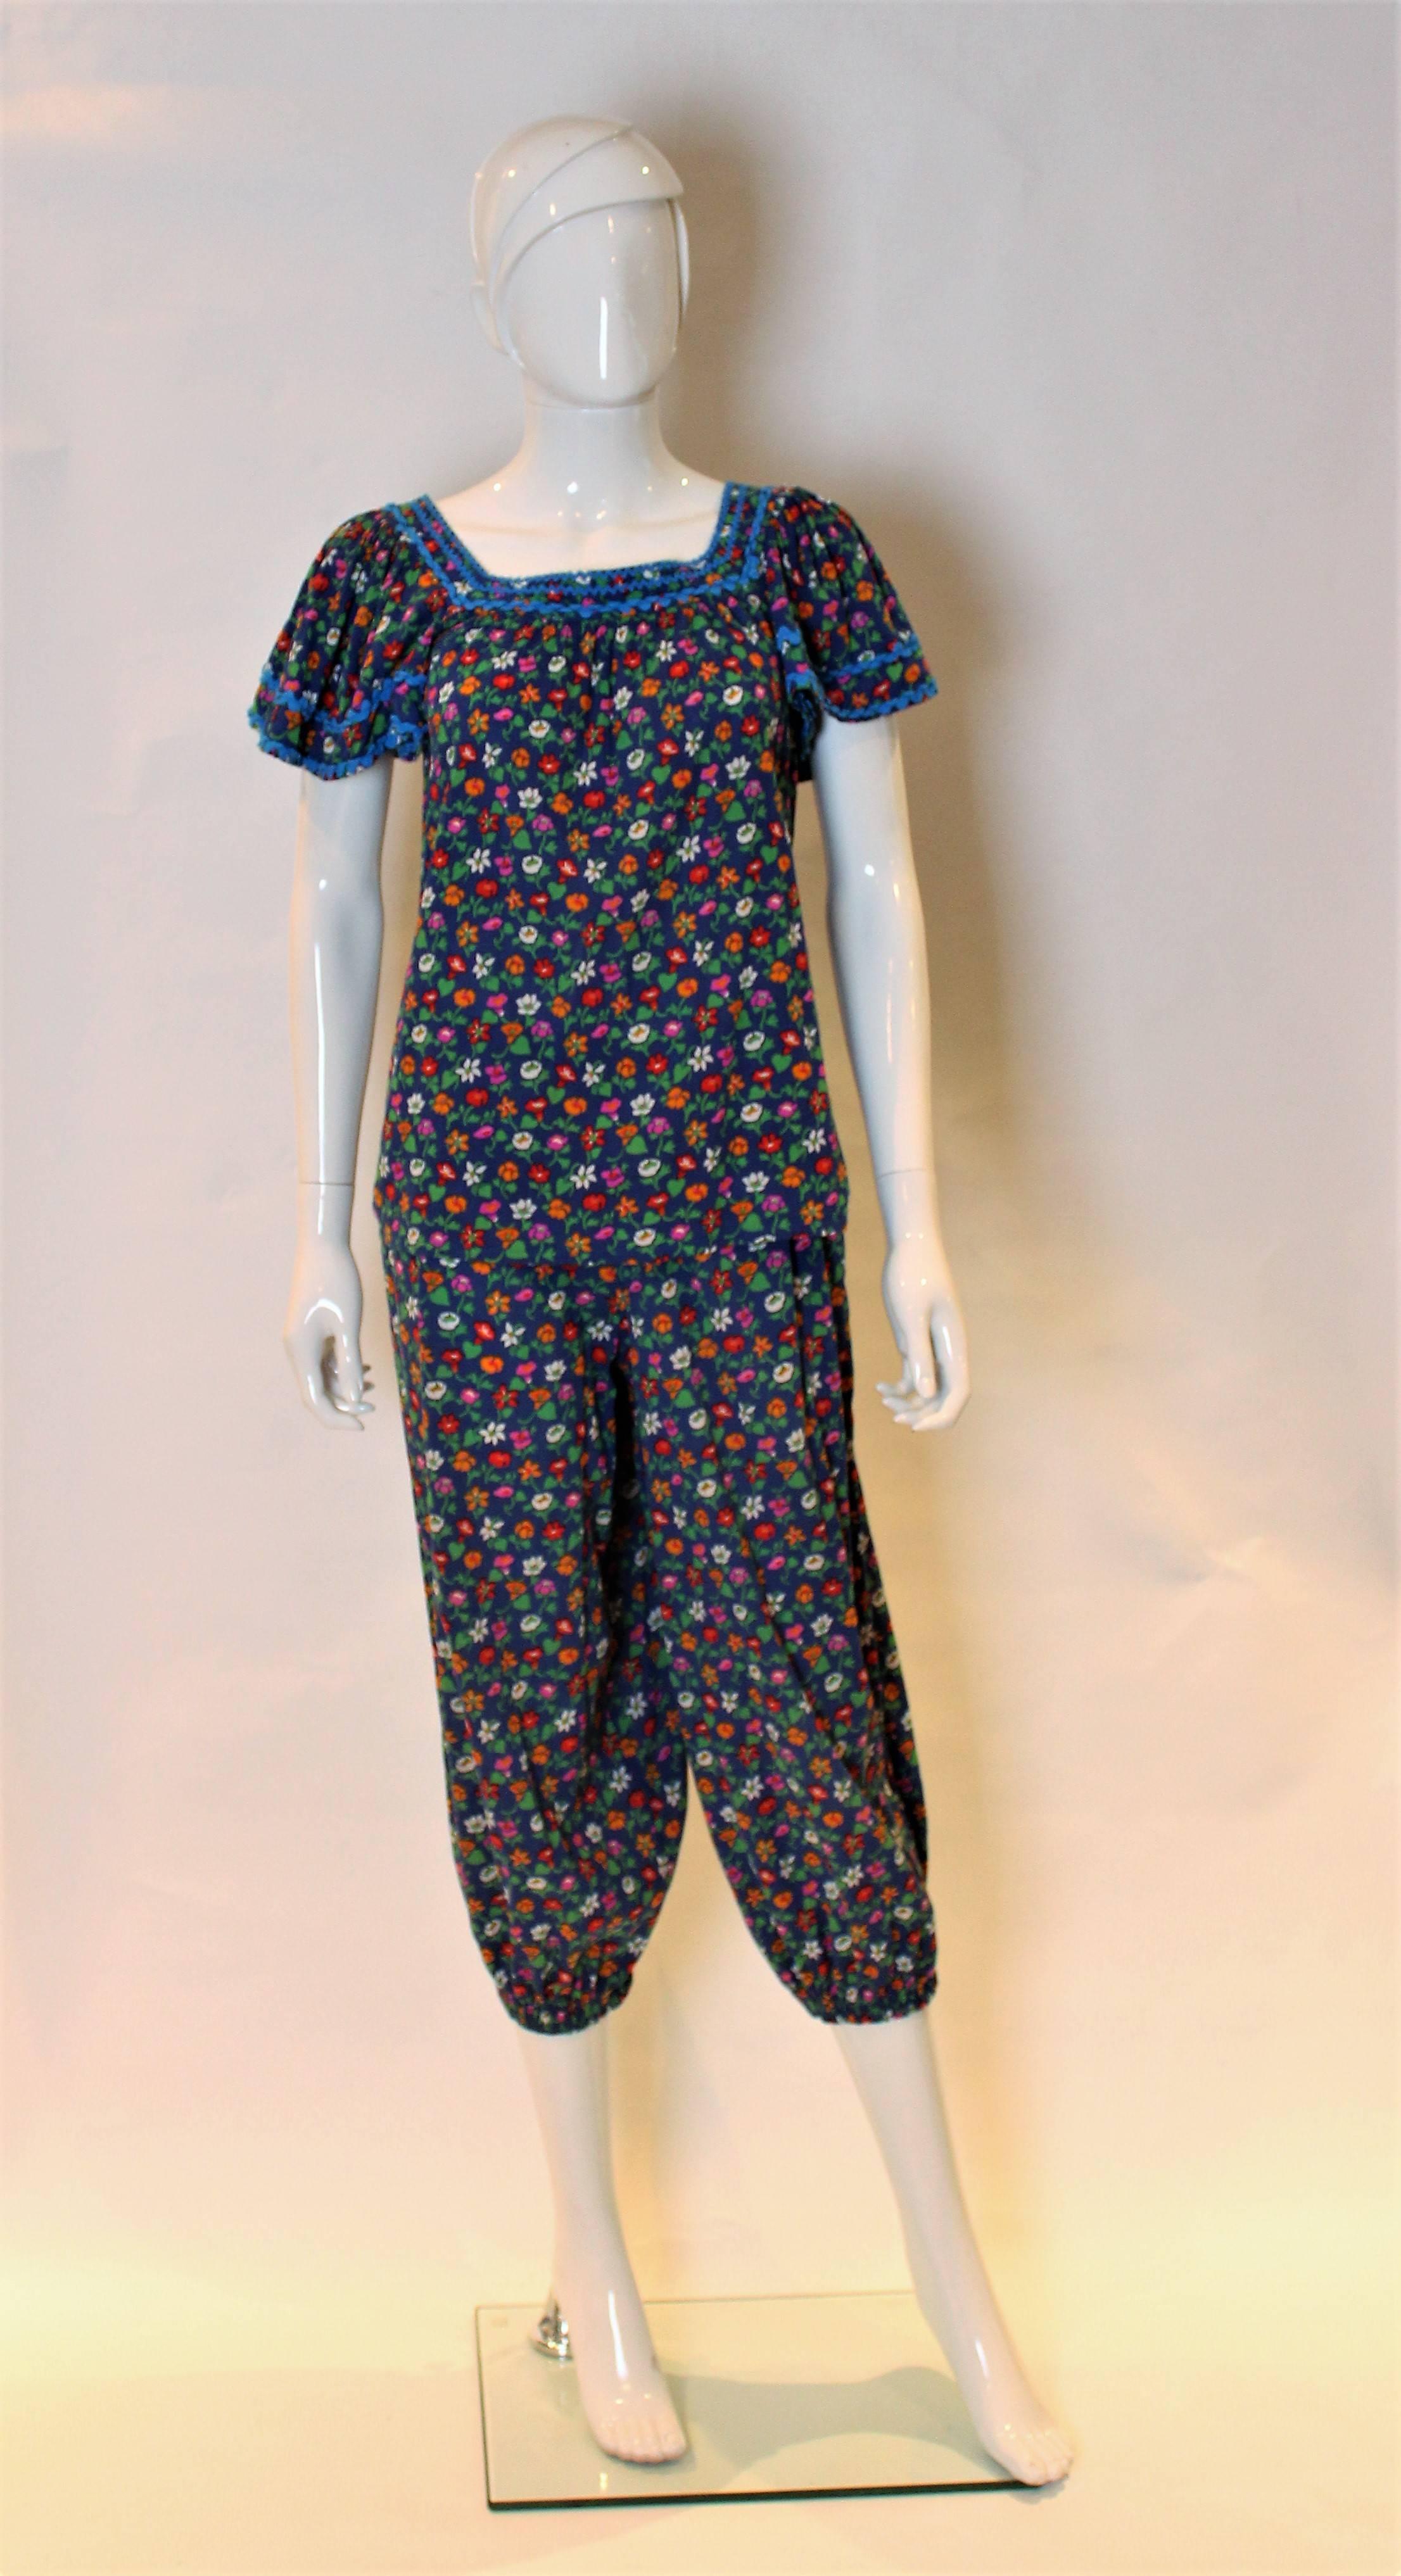 A great outfit for Spring/Summer. This outfit comprises , a short sleeve smock like top , and nicker bocker like trousers. The background is dark blue with a floral pattern in orange, pink, red , whte and green.The top has electric blue trim around